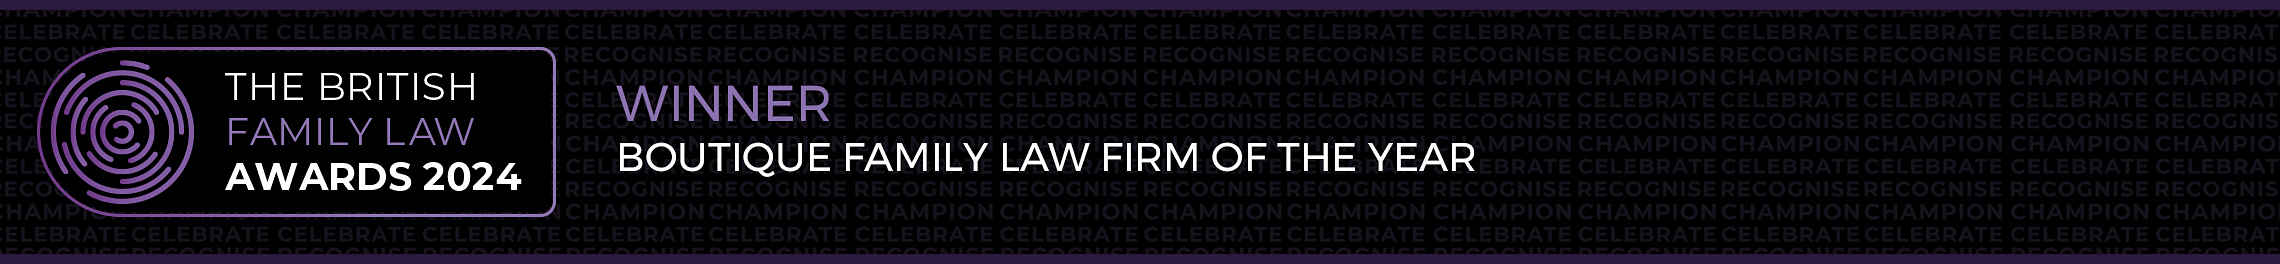 Winner - Boutique Family Law Firm of the Year